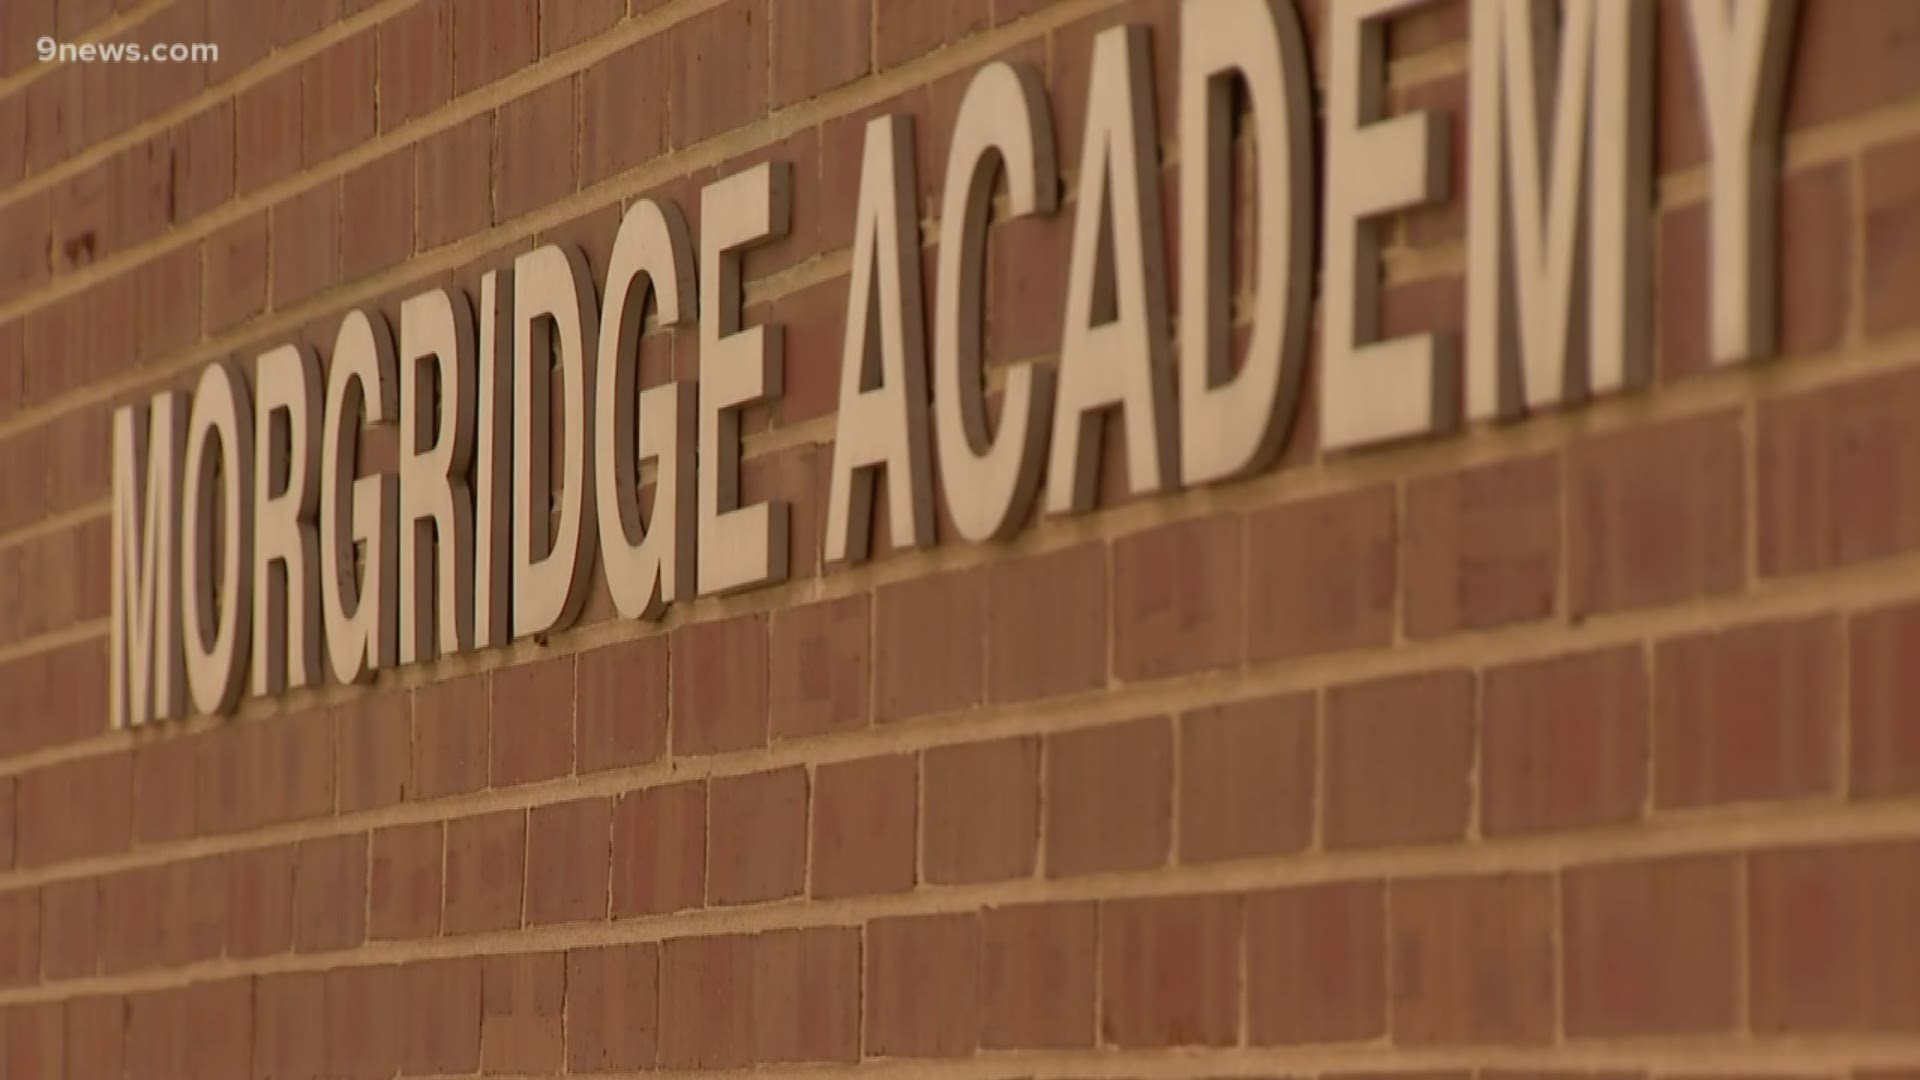 The 70 children at Morgridge Academy all have chronic illnesses that could make them at higher risk for severe symptoms if infected with COVID-19.